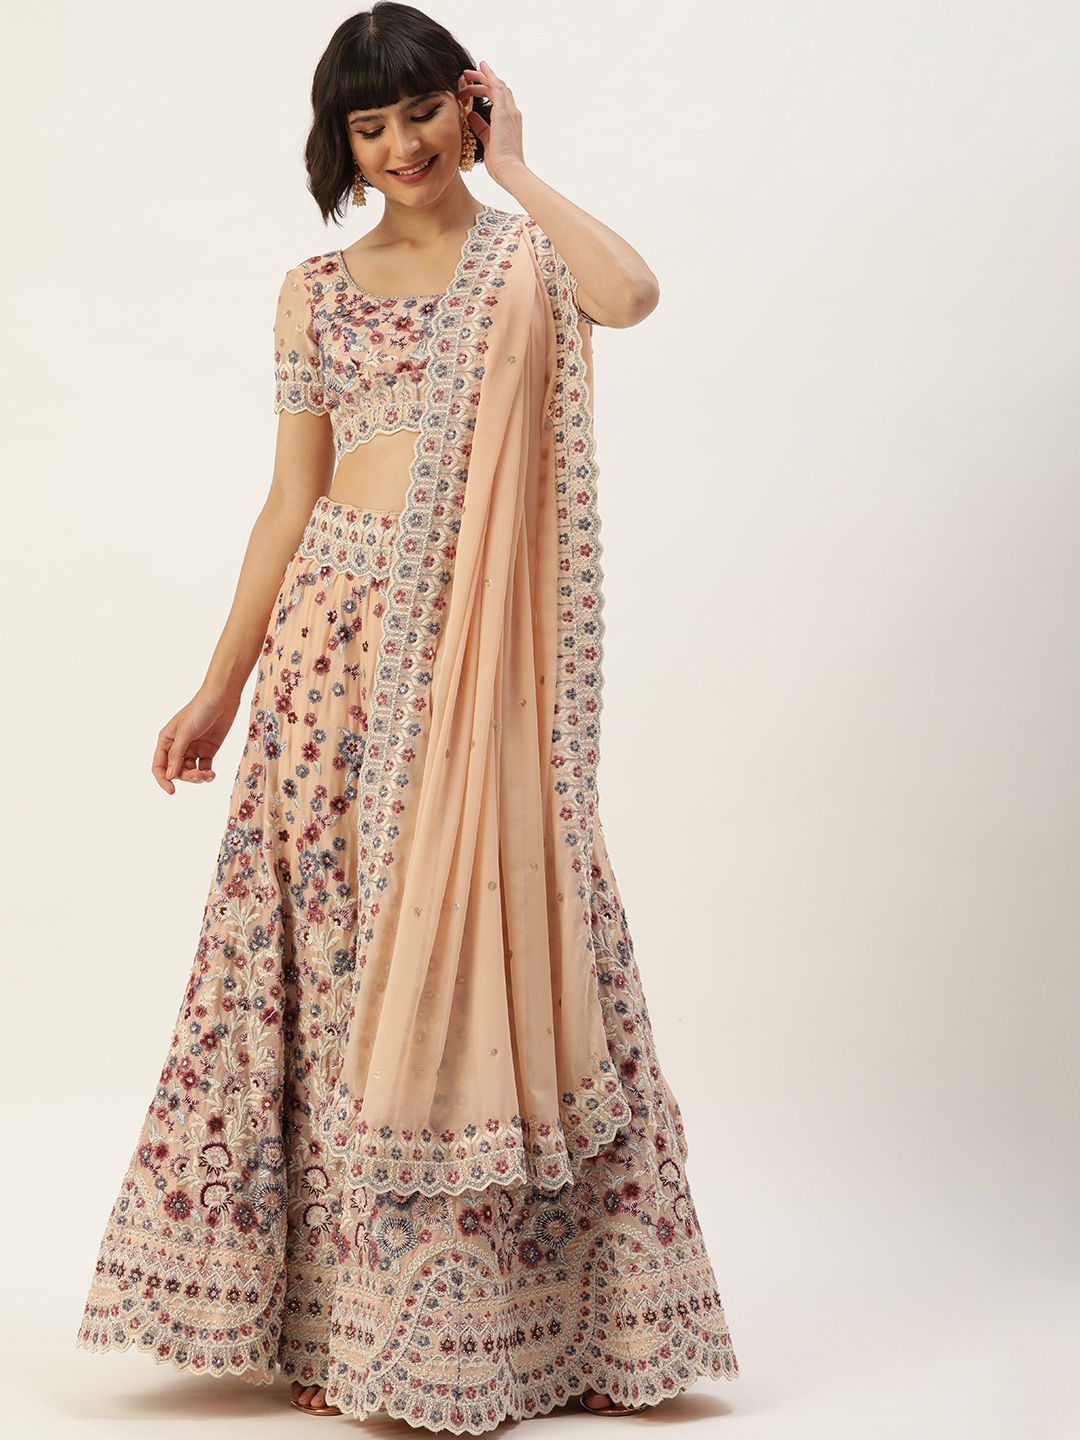 panchhi Peach-Coloured & Blue Embroidered Thread Work Semi-Stitched Lehenga & Unstitched Blouse With Dupatta Price in India